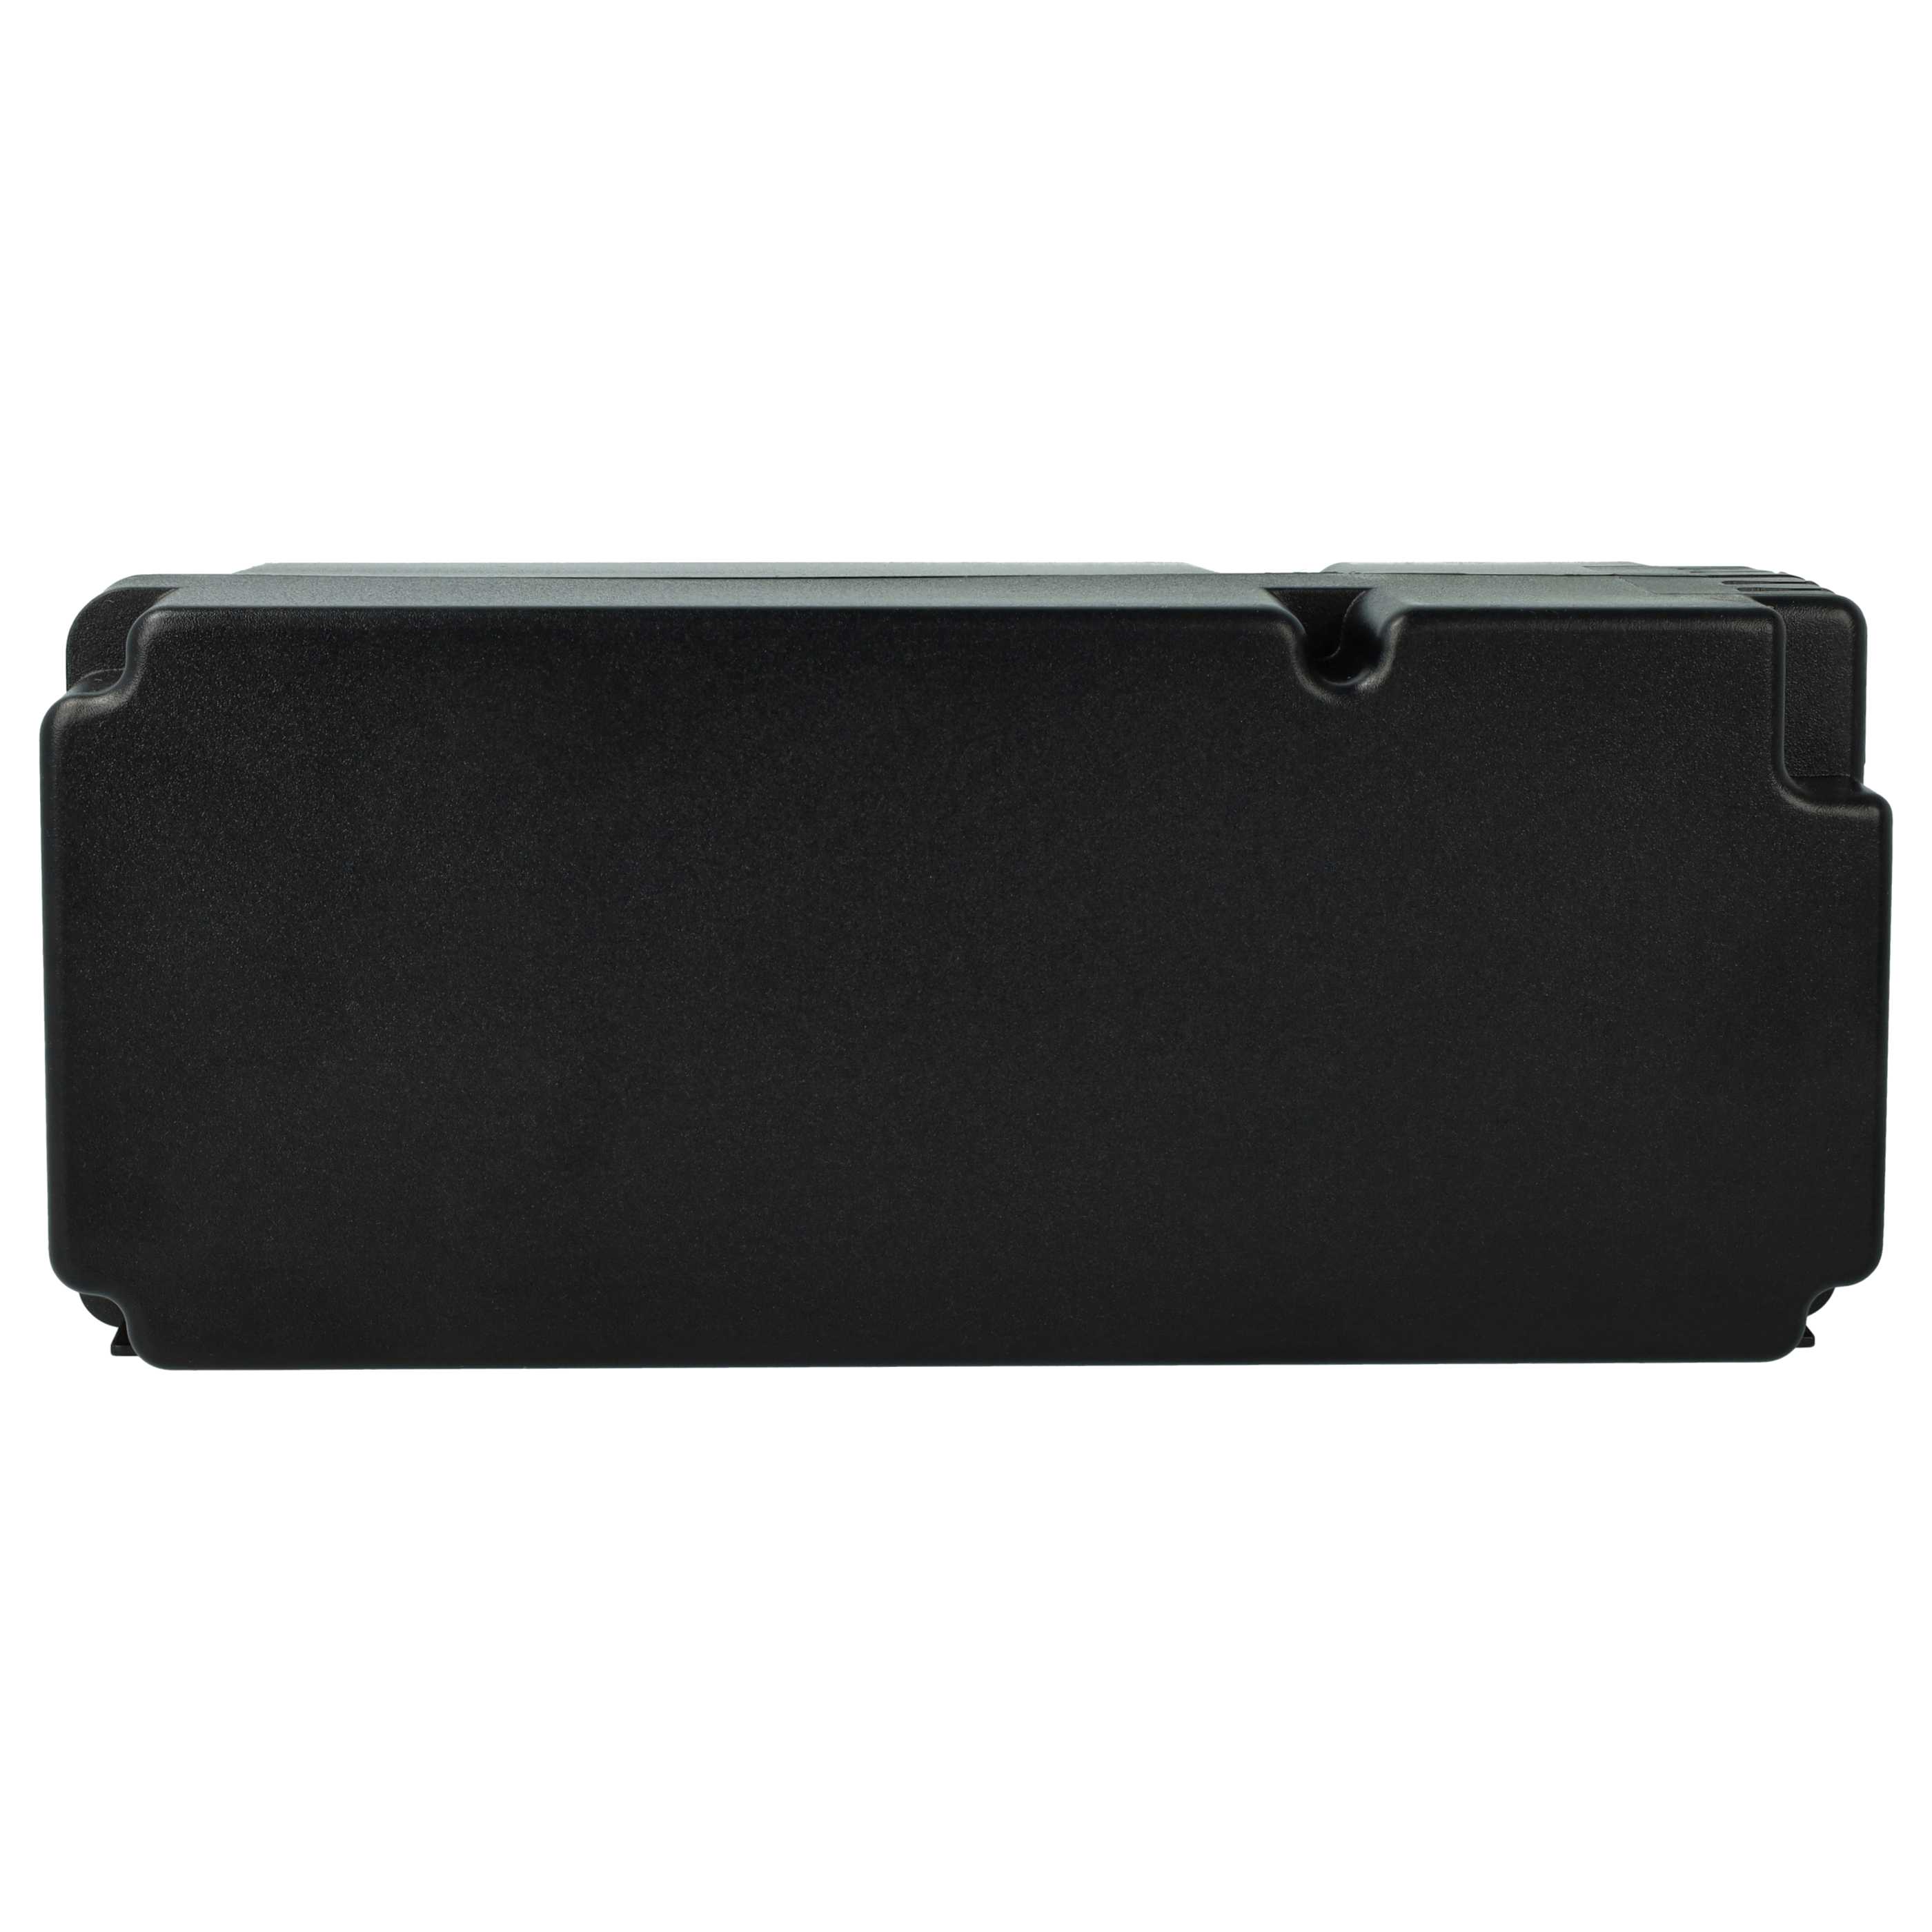 Lawnmower Battery Replacement for Yard Force 862615, 862601, 0862622001, 0862622 - 5000mAh 25.2V Li-Ion, black